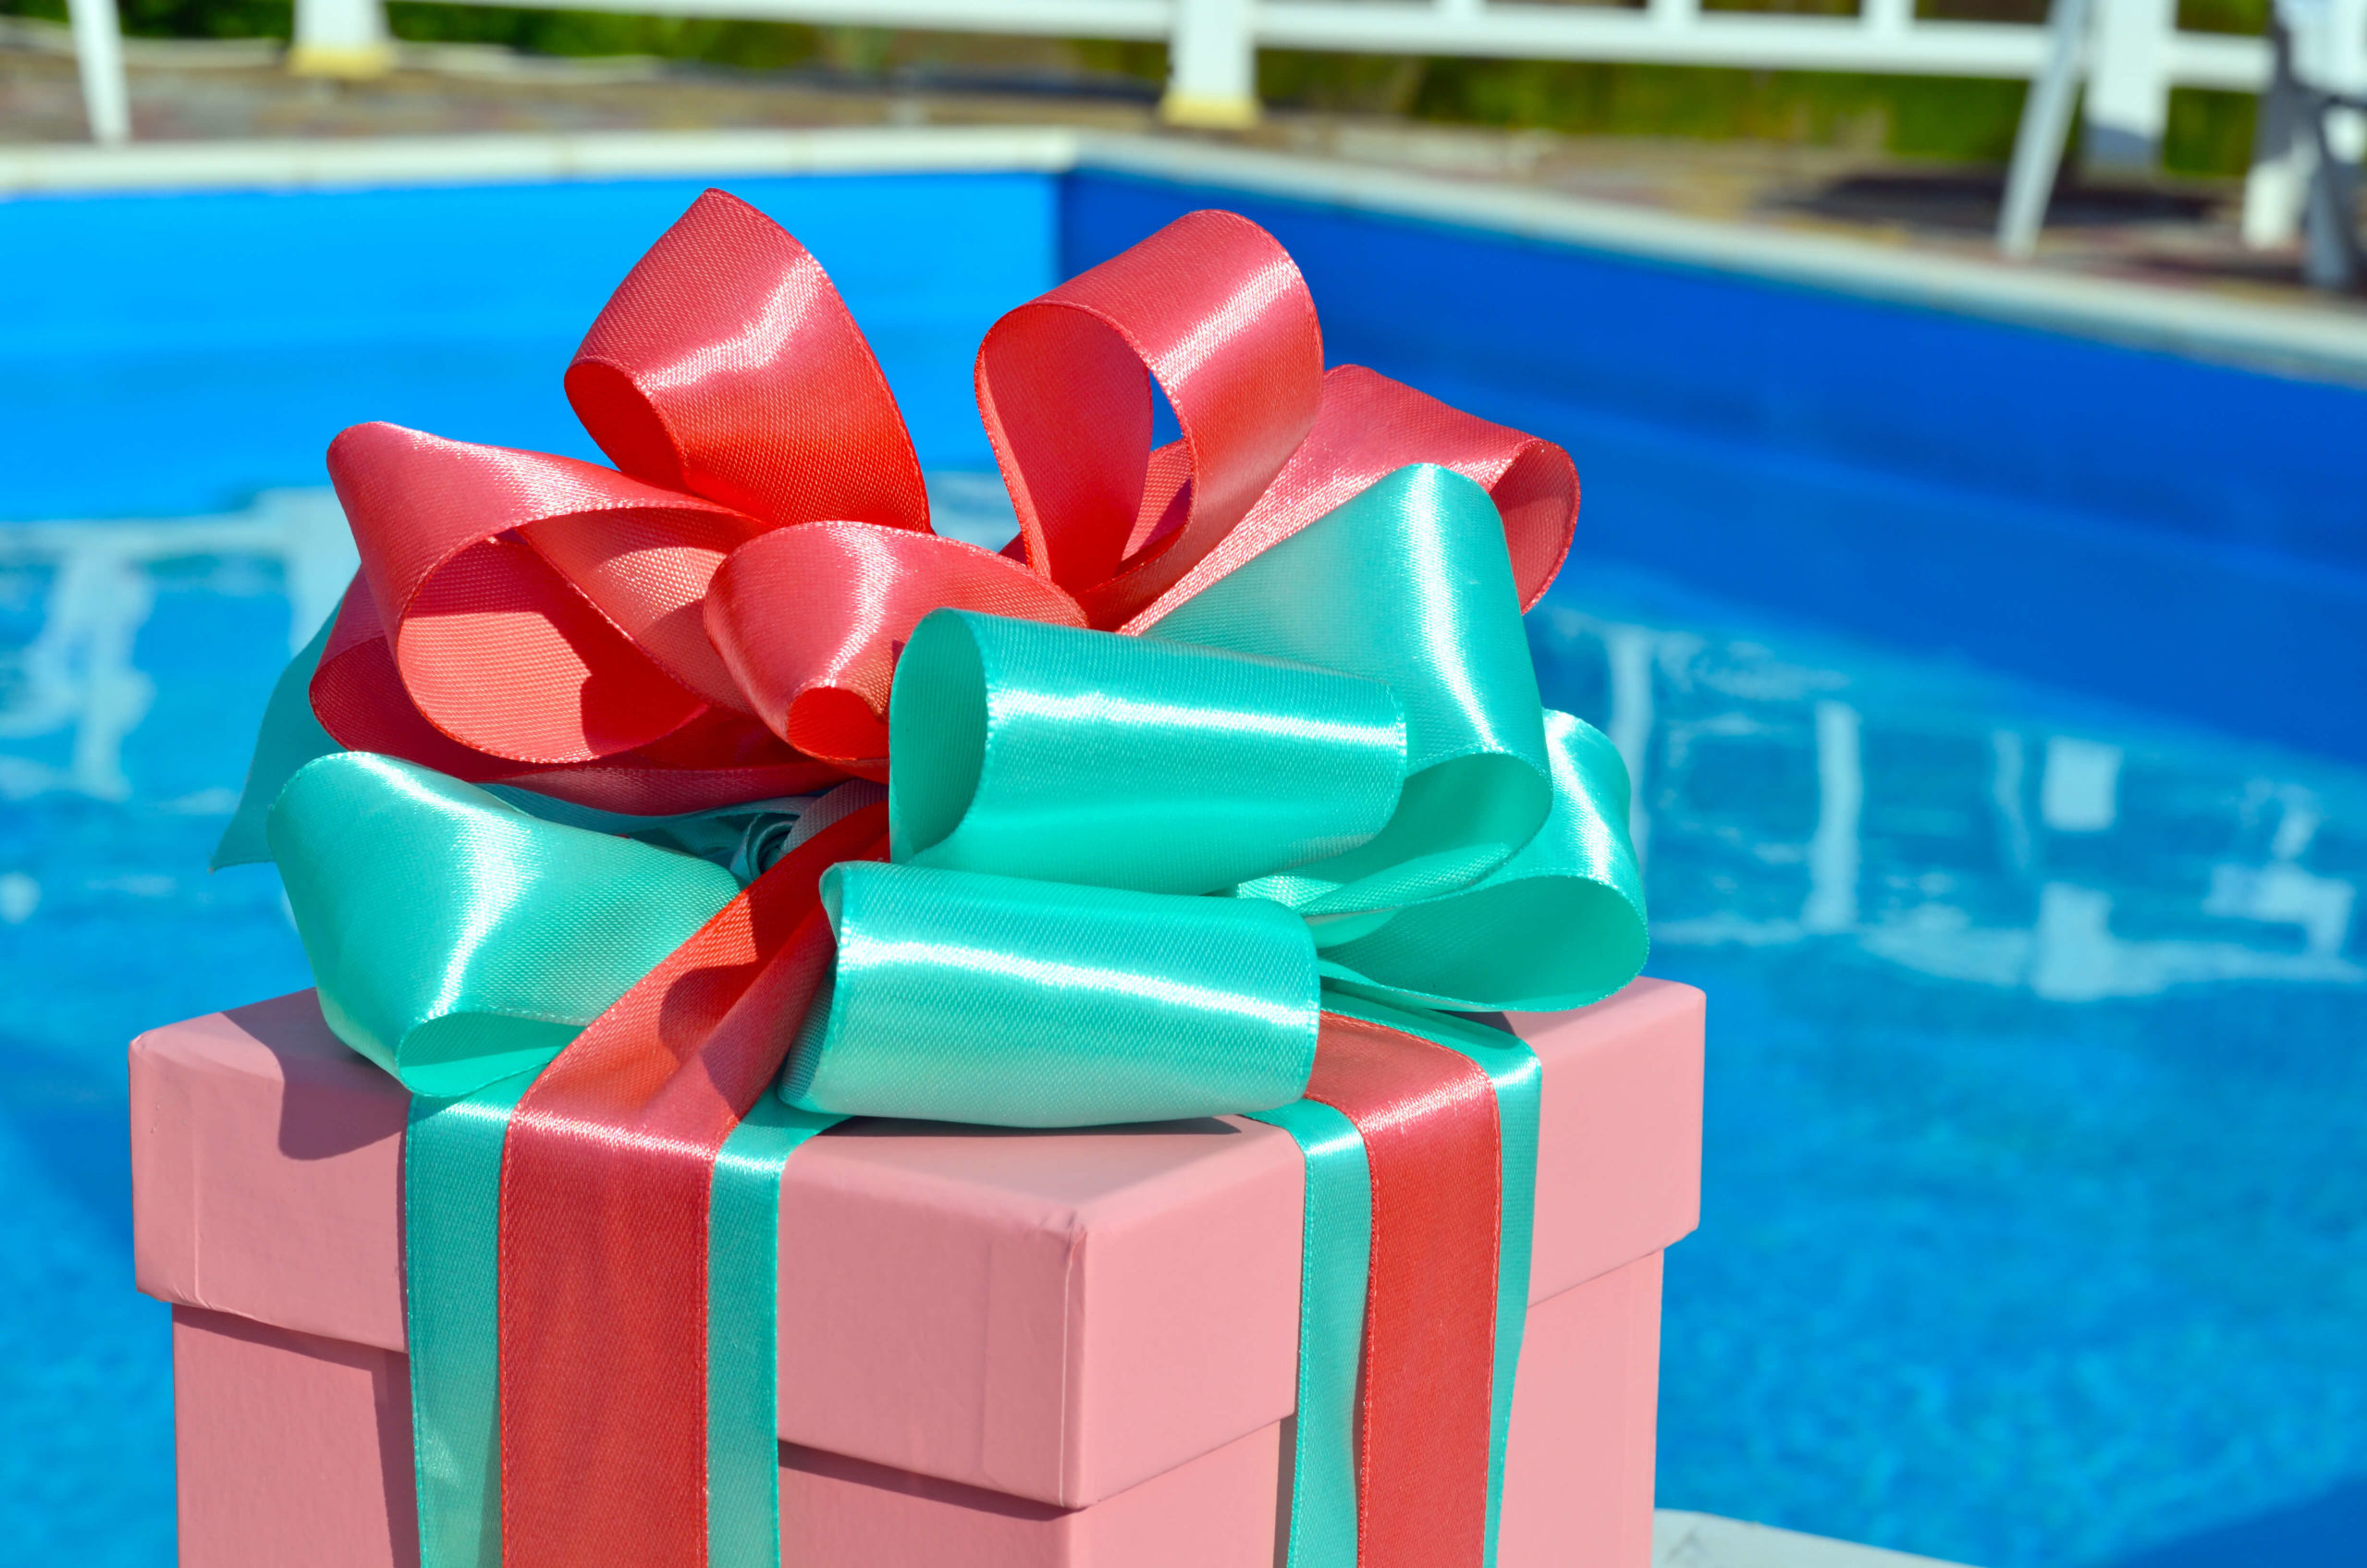 Wrapped Christmas Gift by Pool